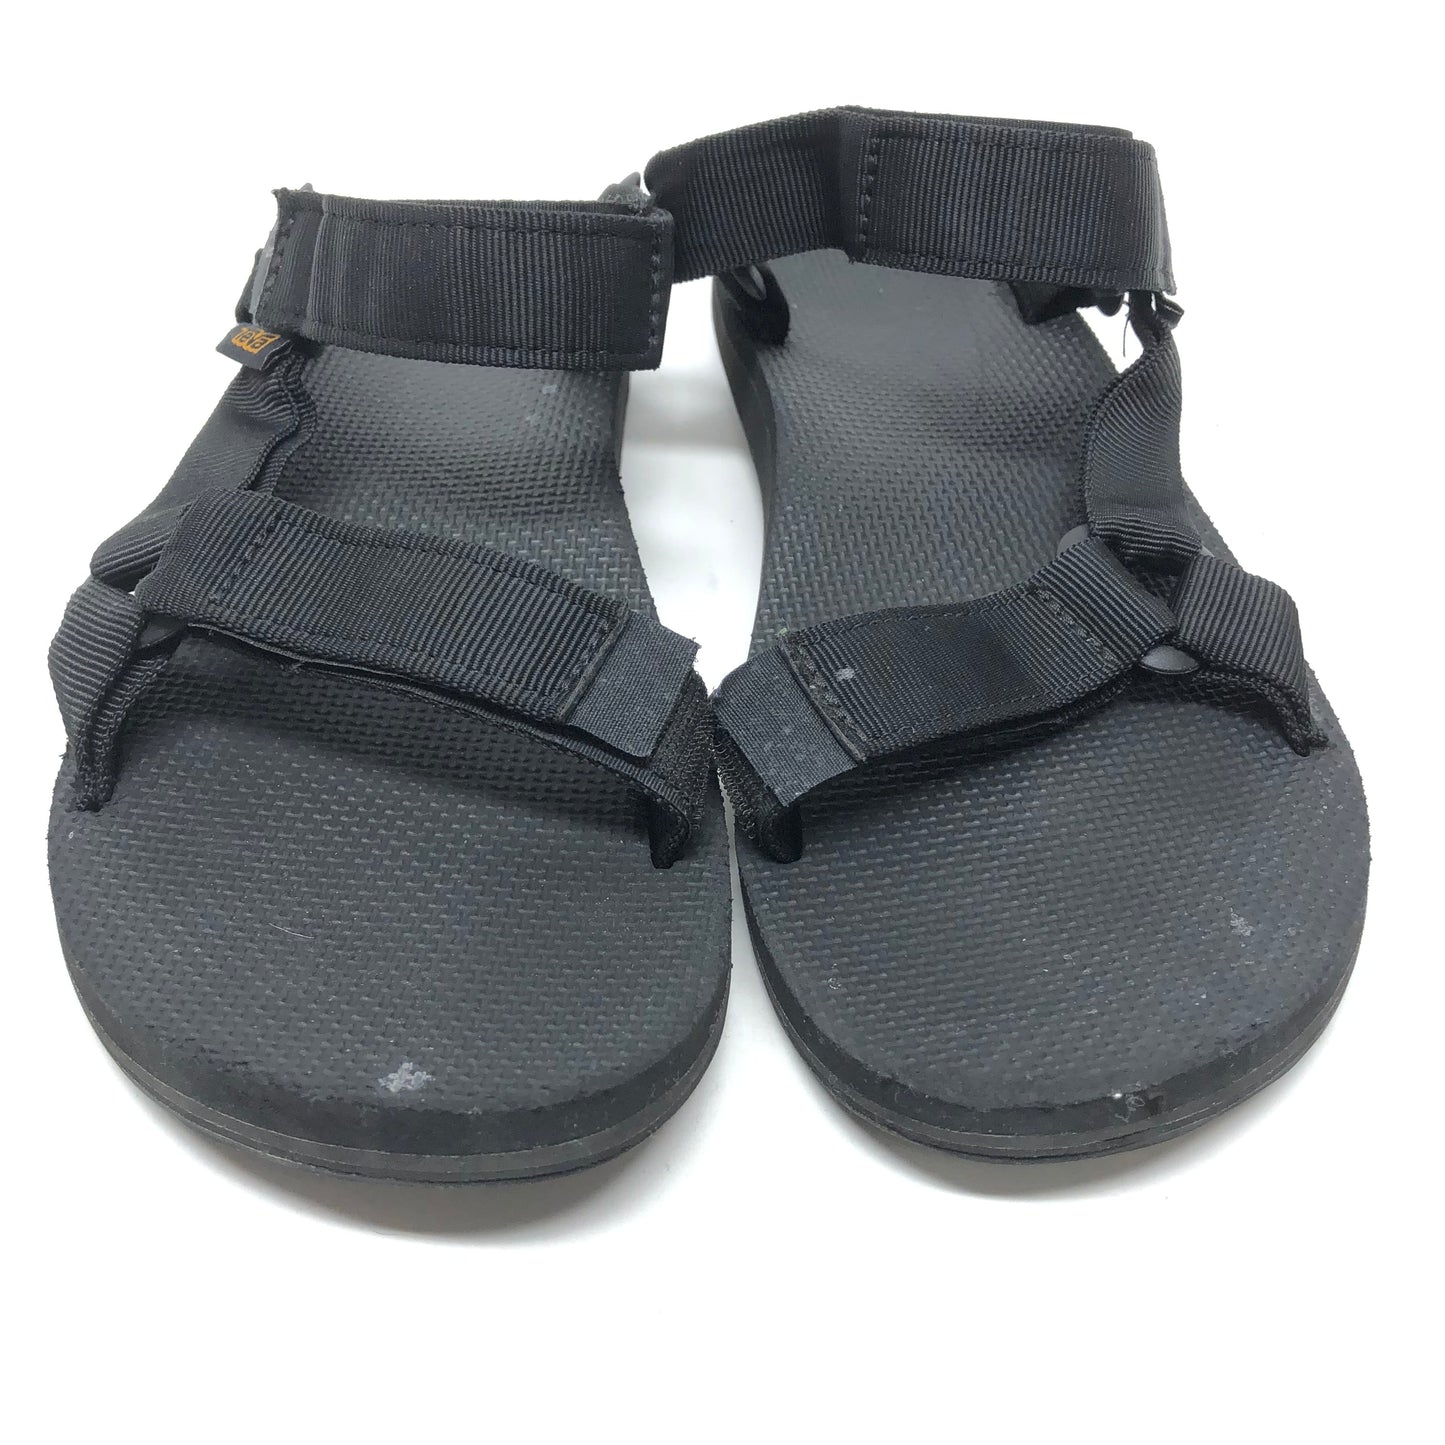 Sandals Flats By Teva  Size: 9